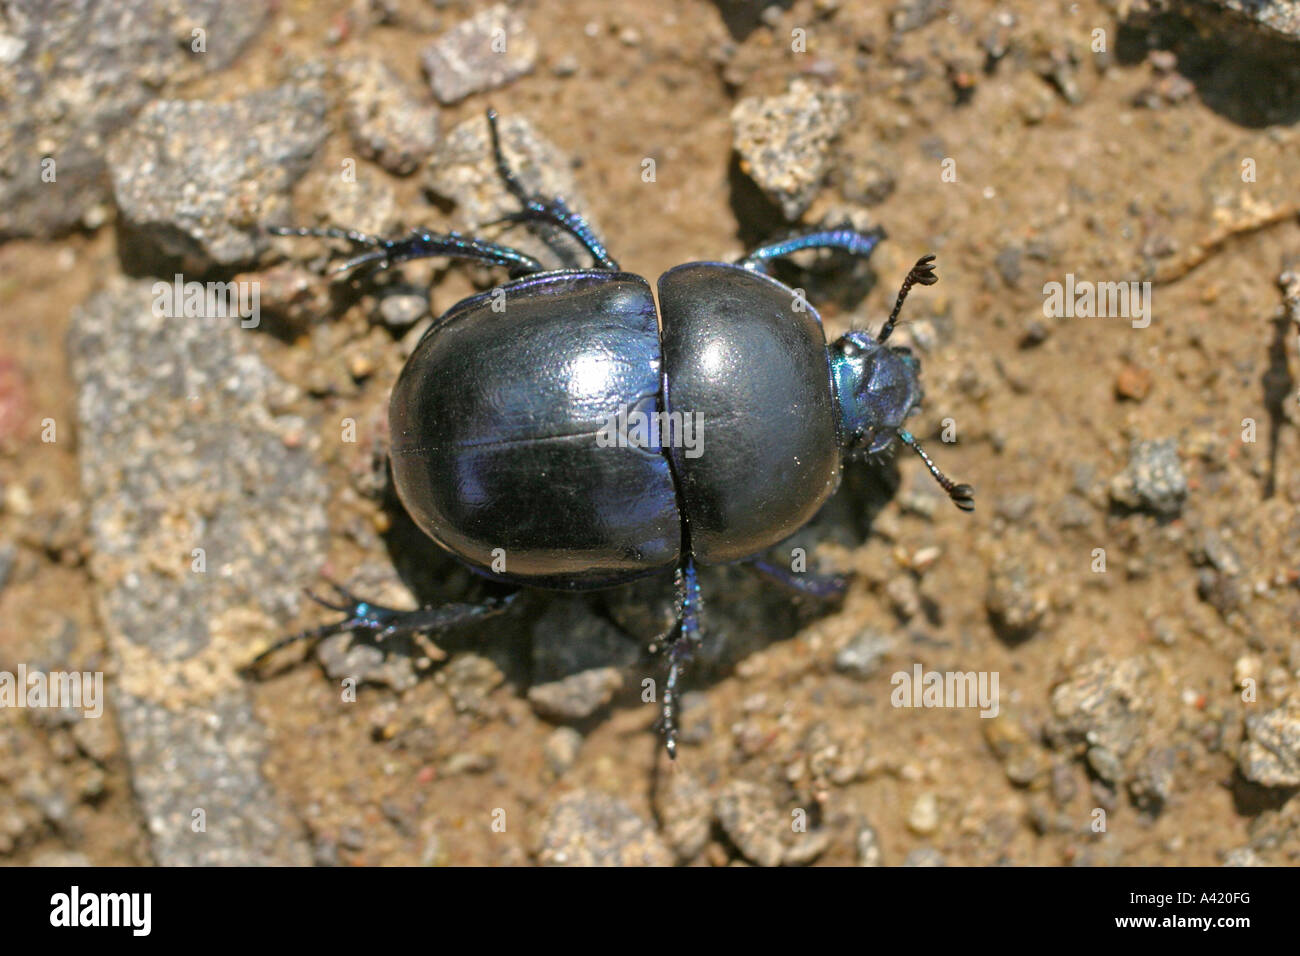 DOR BEETLE GEOTROPES VERNALIS MOVING OVER GROUND Stock Photo